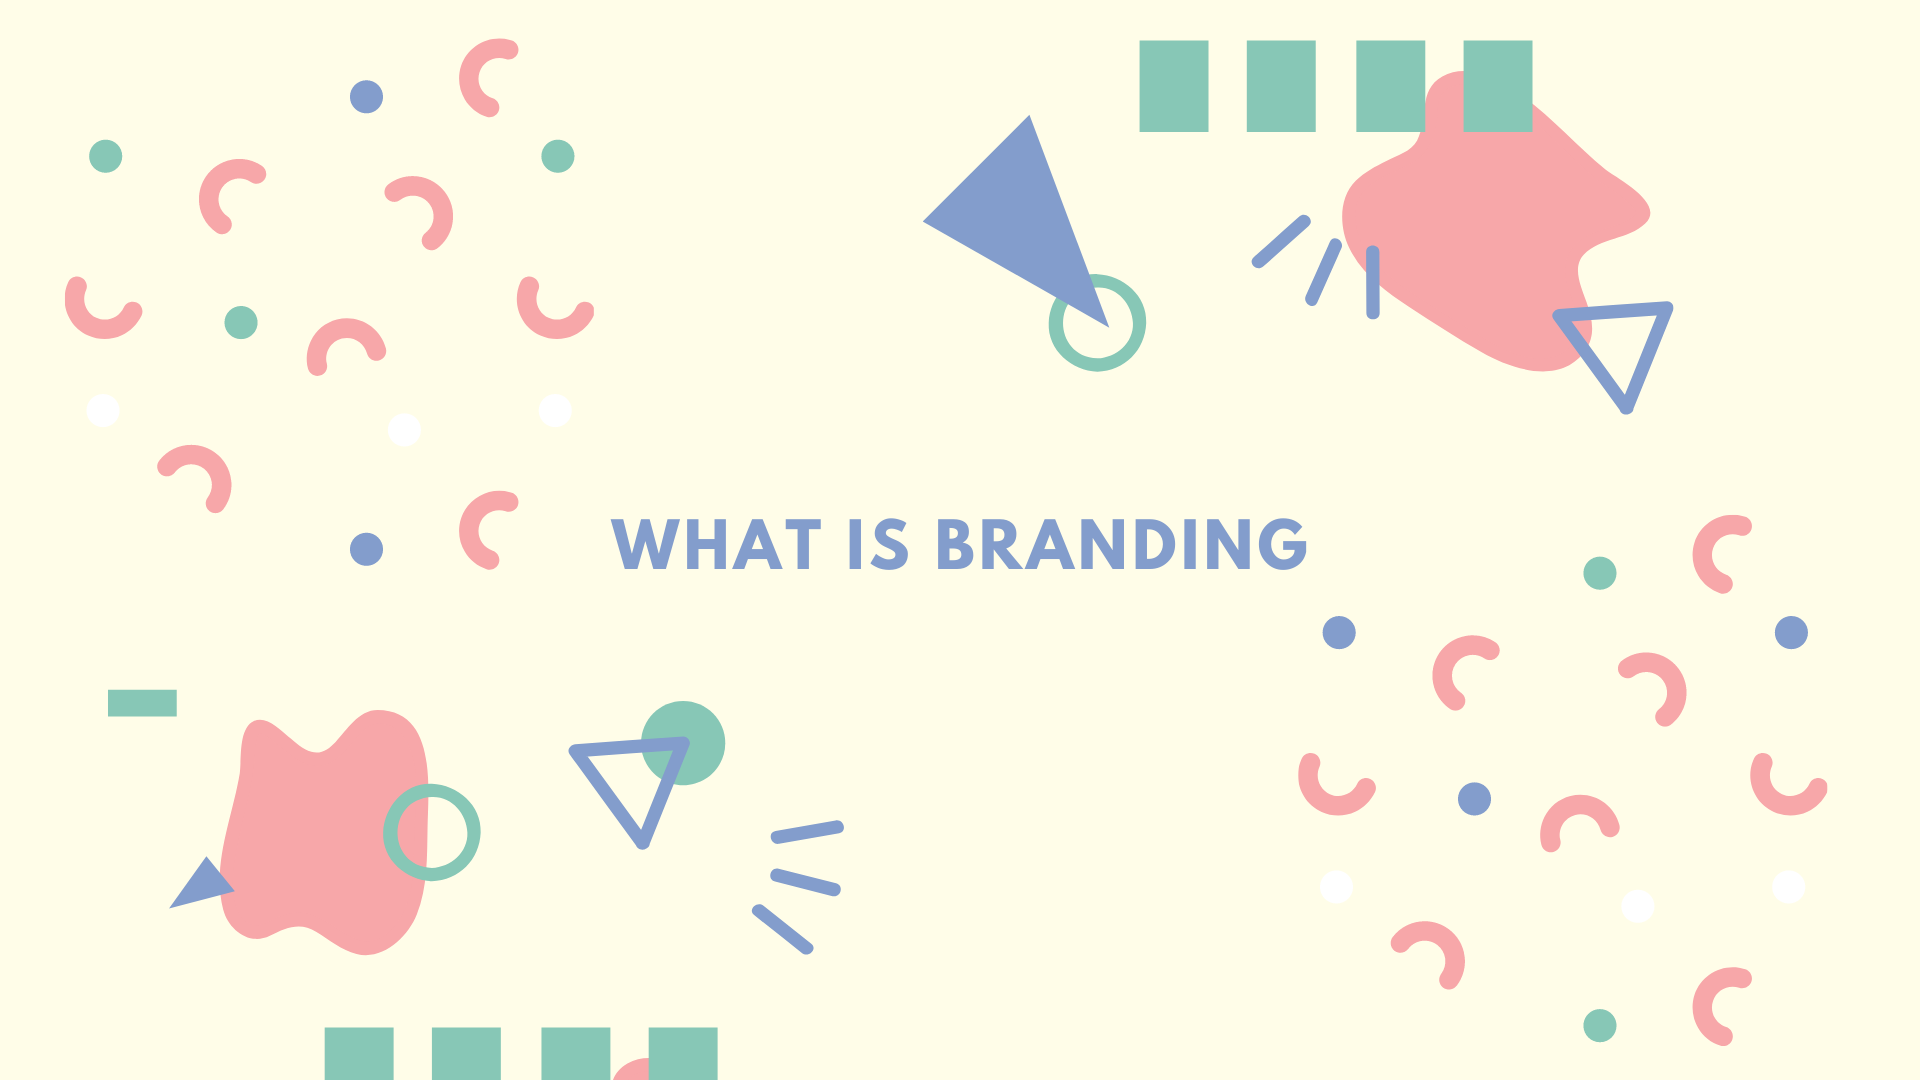 WHAT IS BRANDING?